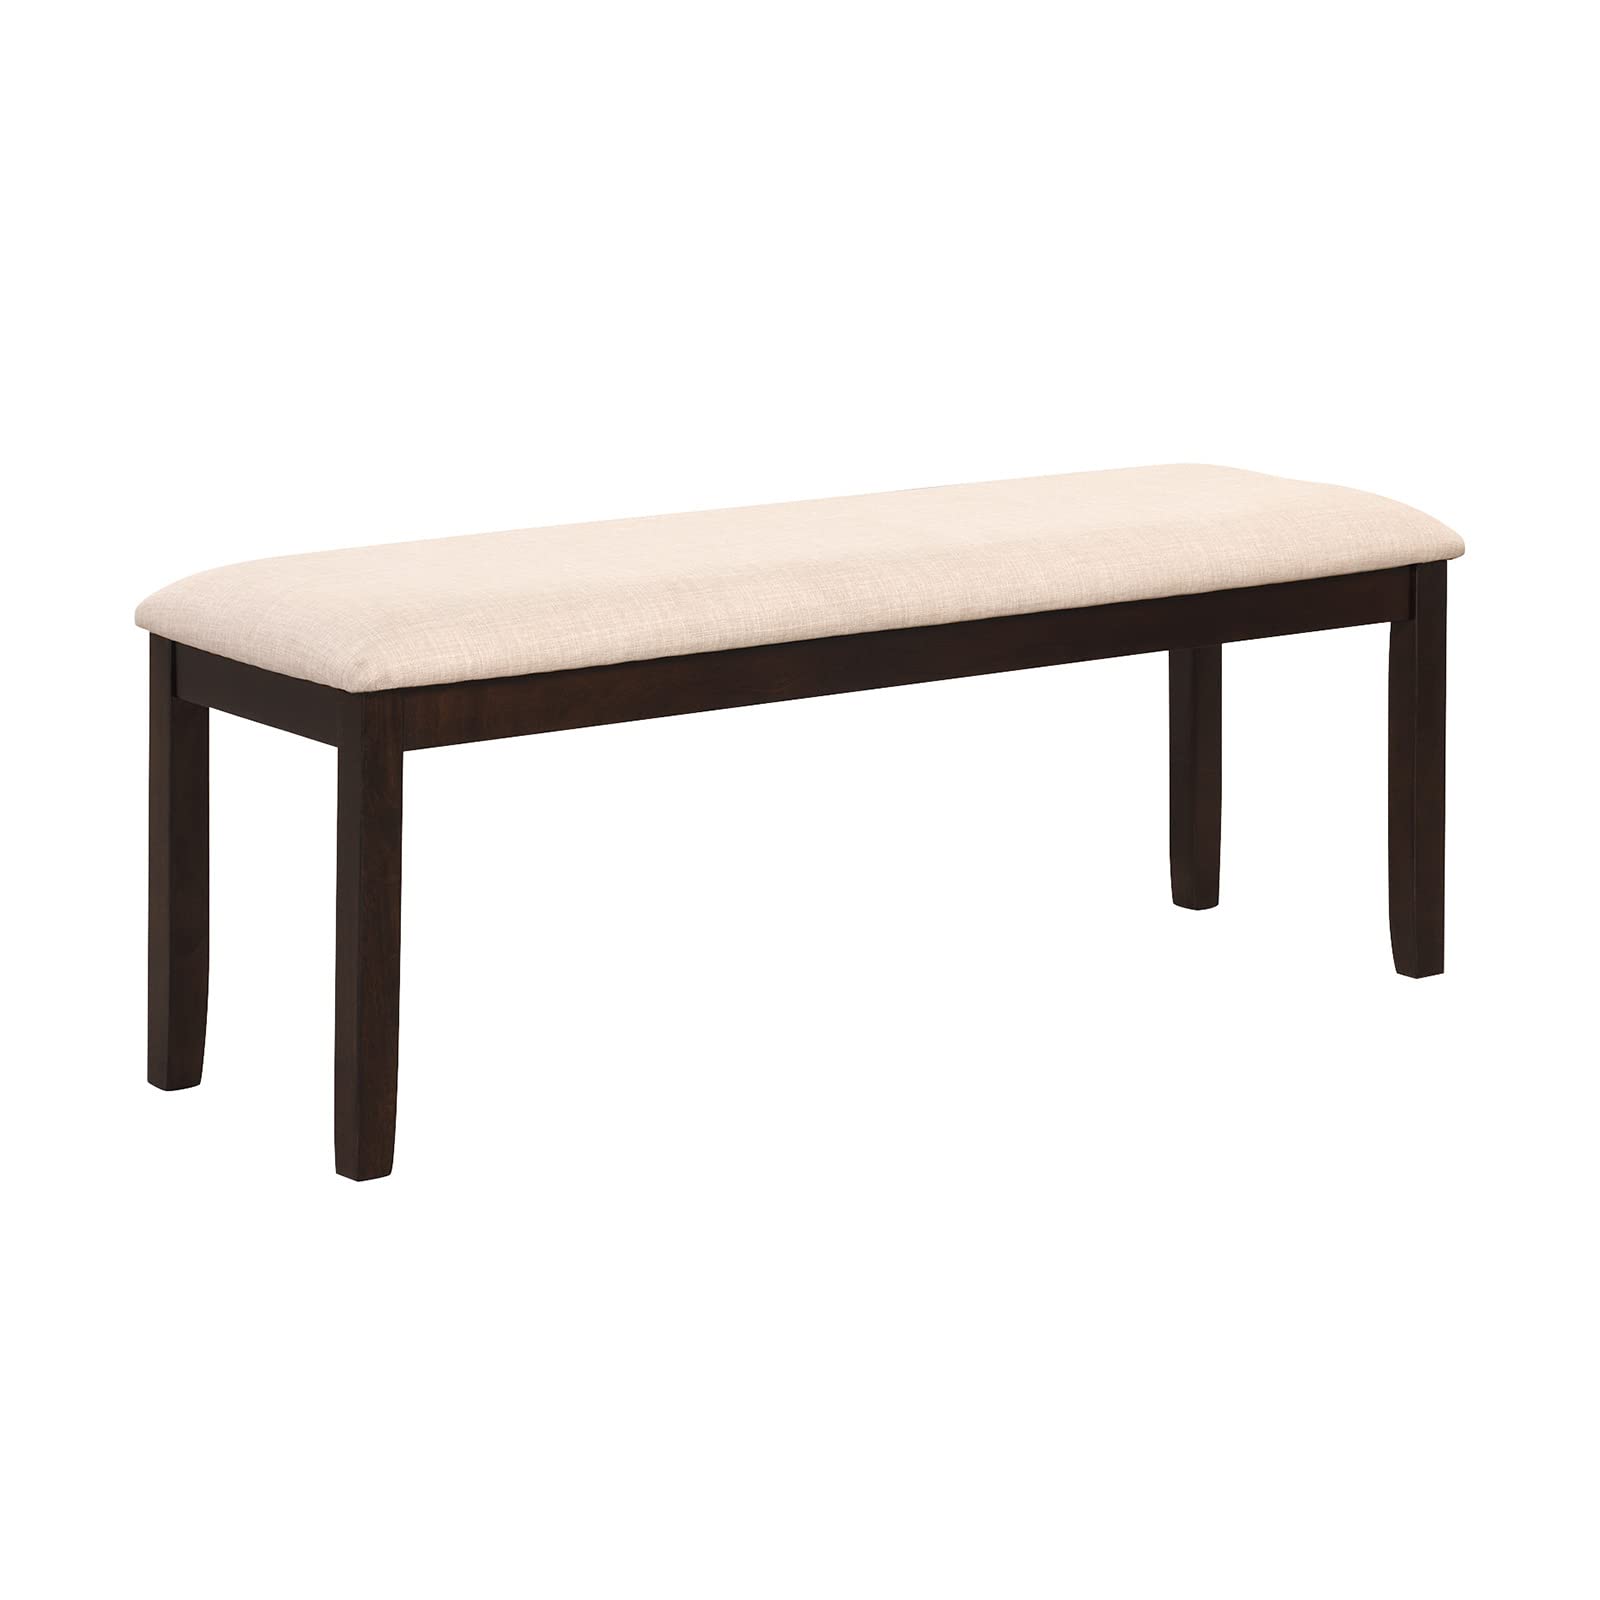 Giantex Upholstered Bench, Ottoman Bench with Padded Cushion